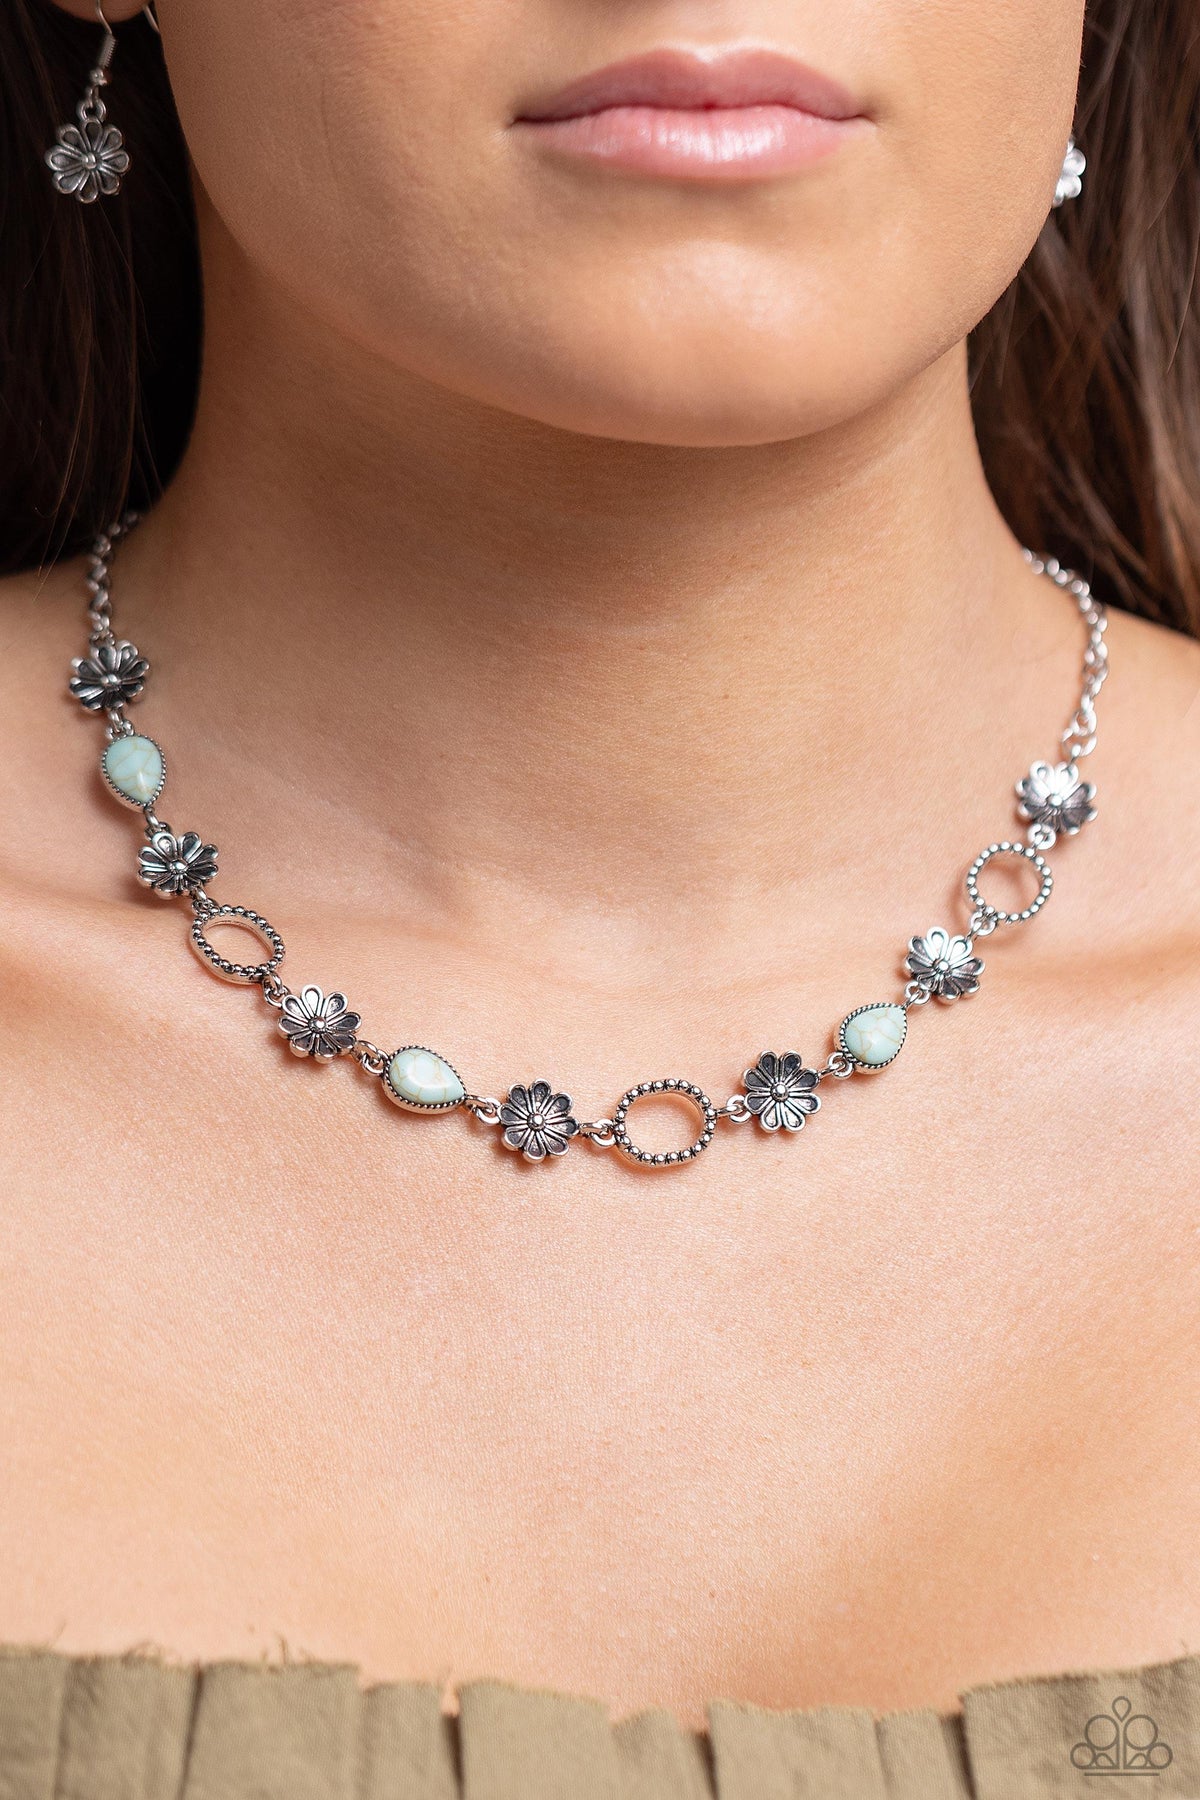 Casablanca Chic Blue Stone Necklace - Paparazzi Accessories-on model - CarasShop.com - $5 Jewelry by Cara Jewels